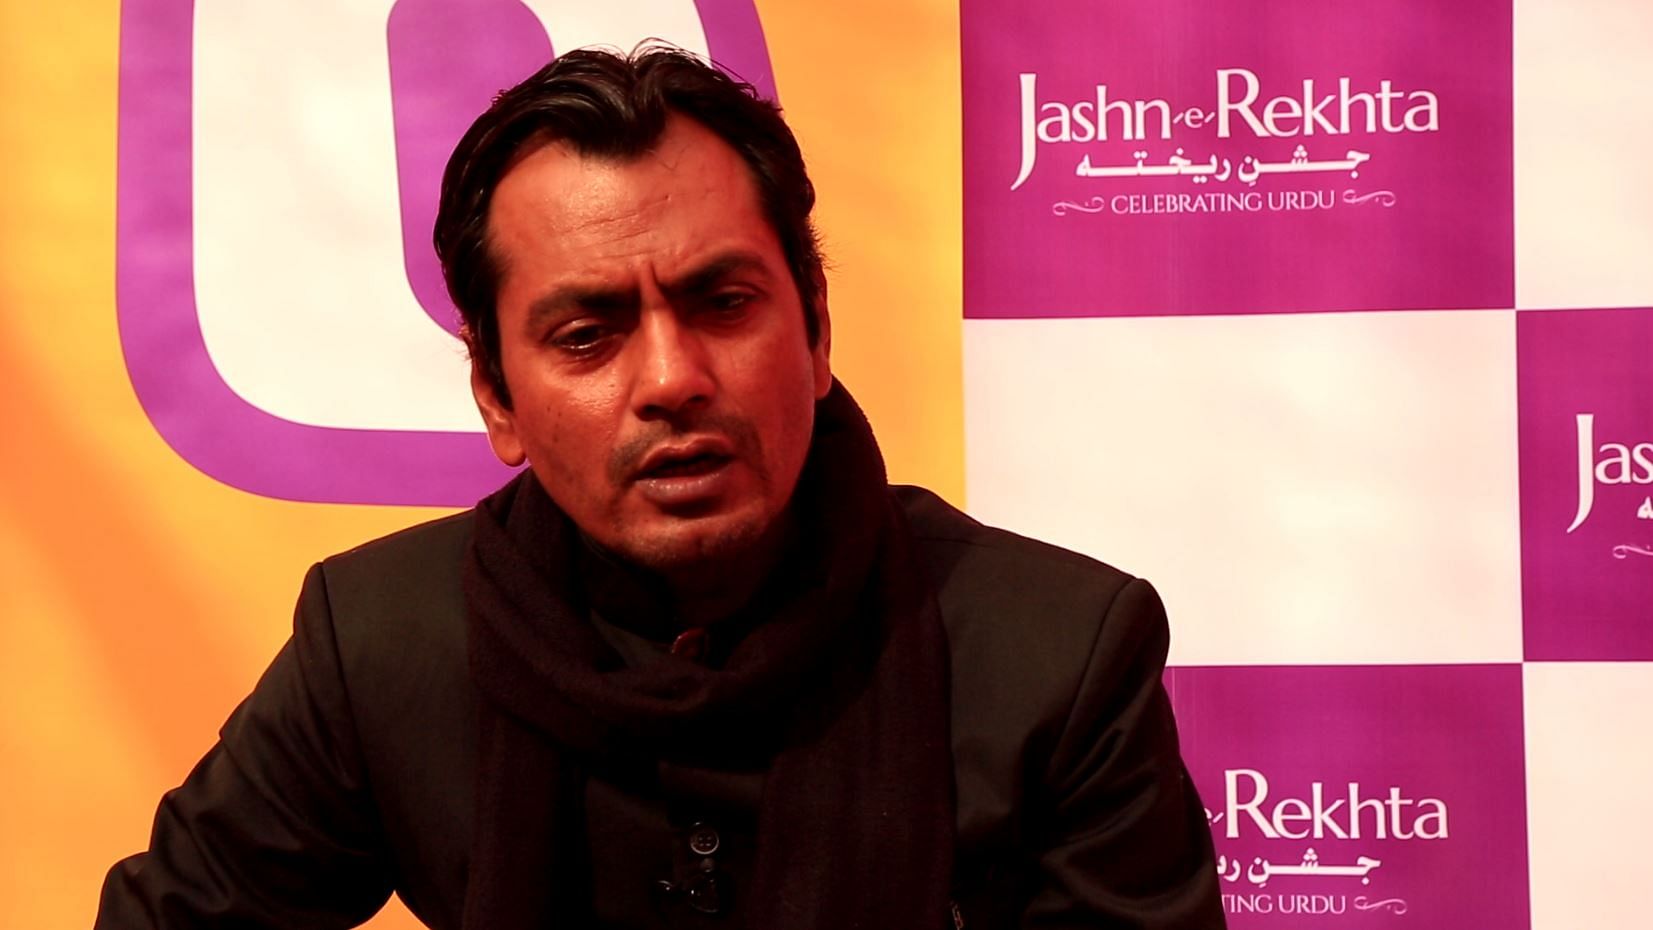 On the side-lines of Jashn-e-Rekhta, India’s largest Urdu festival in New Delhi, Nawazuddin Siddiqui opens up about the price of writing truth.&nbsp;